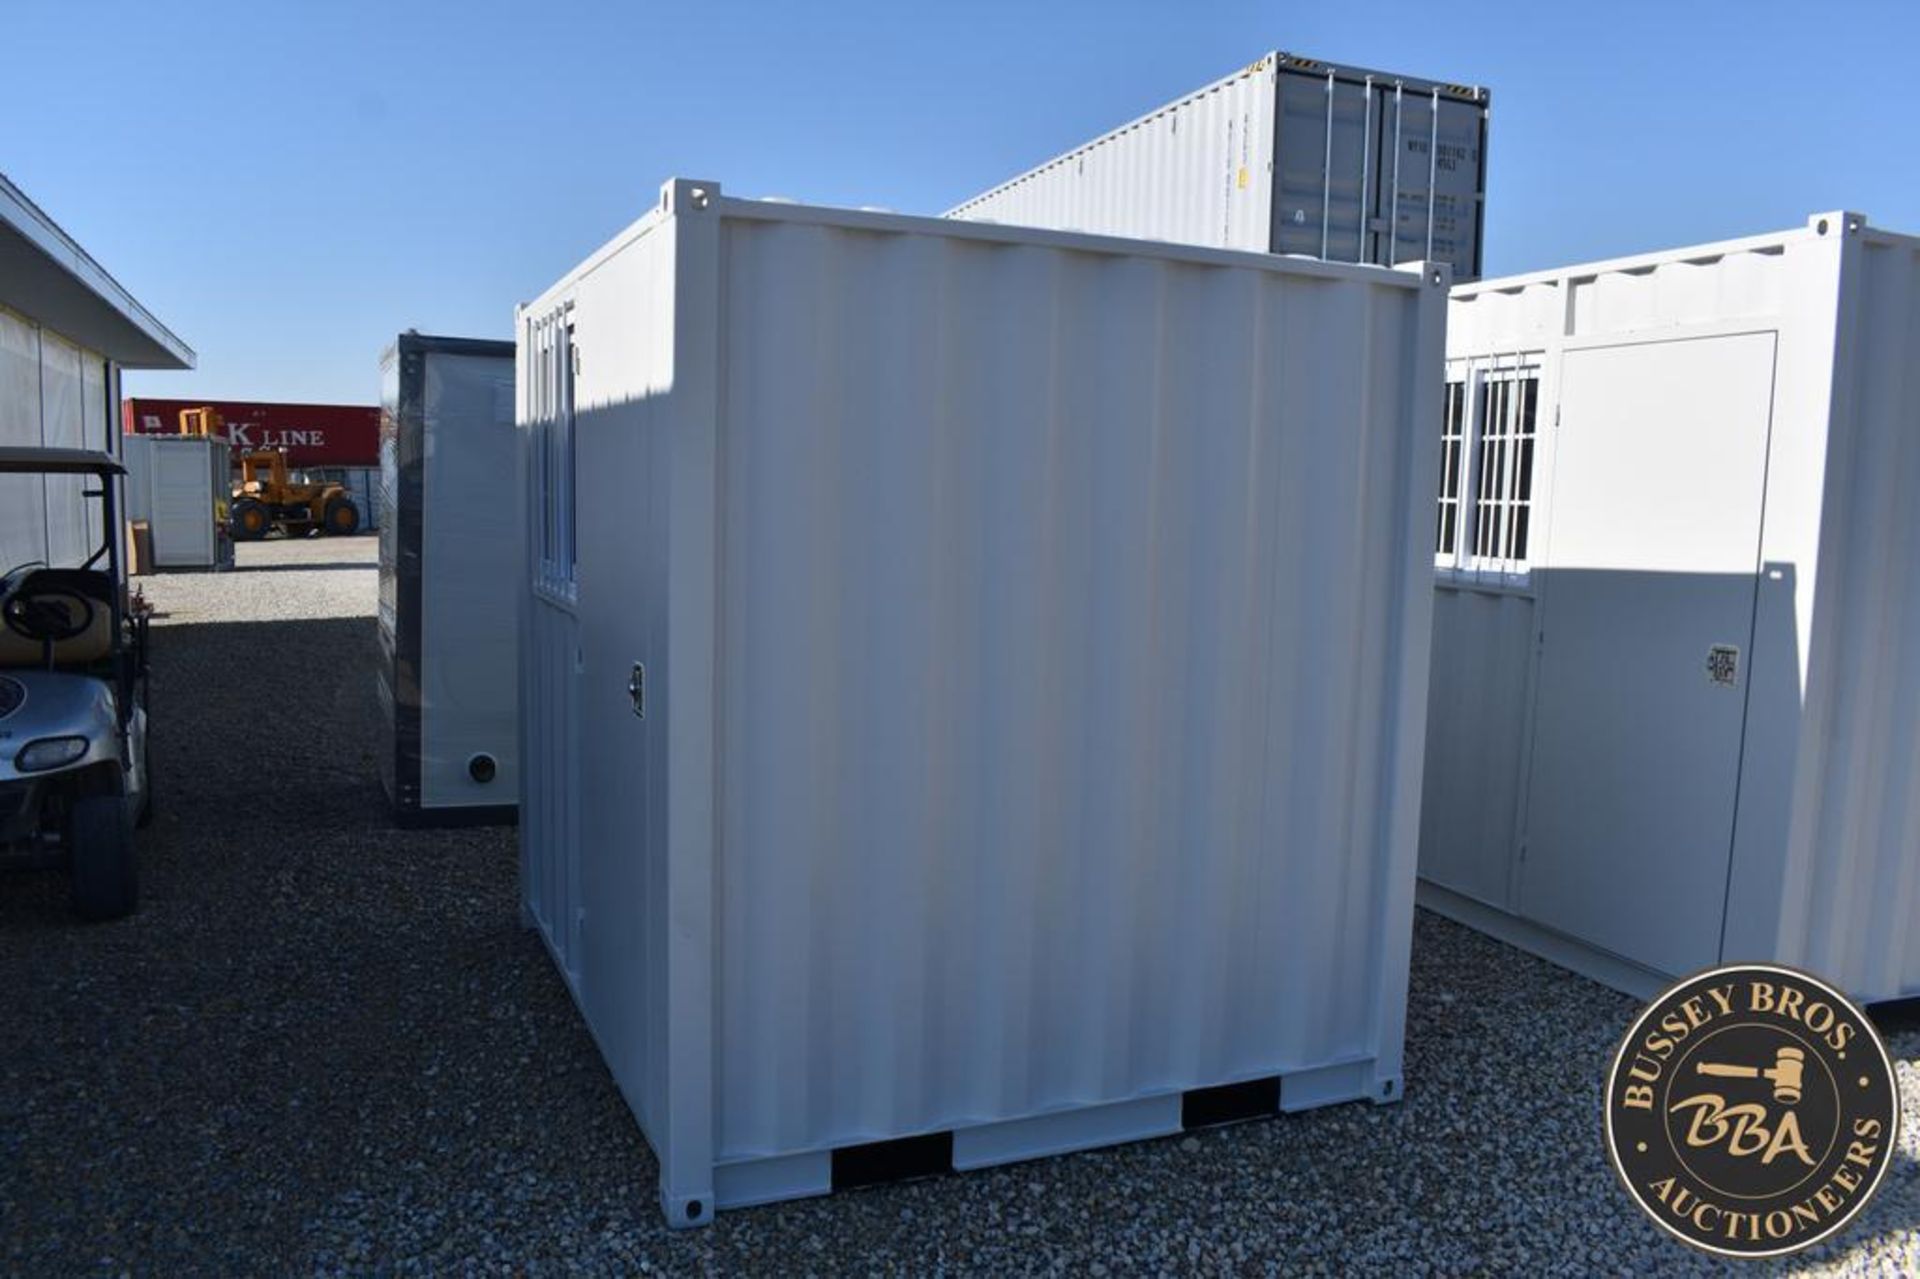 SUIHE 8FT OFFICE CONTAINER 24910 - Image 3 of 8